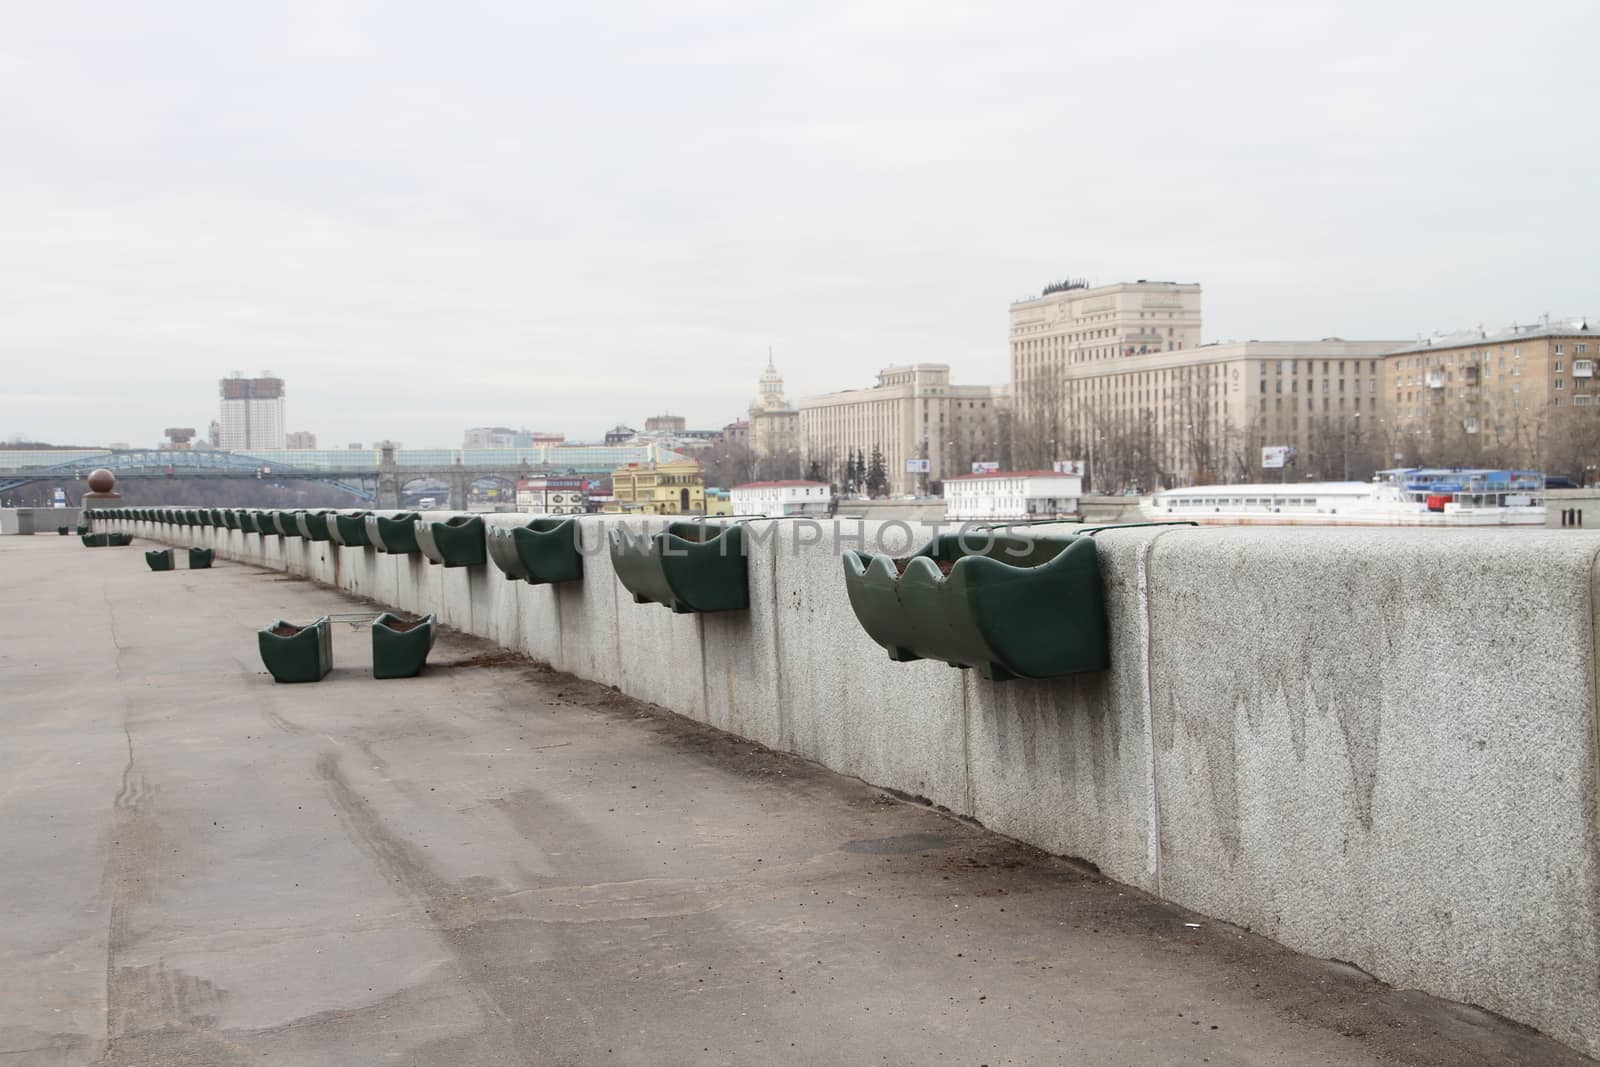 Moscow, Russia - April 19, 2012. In the spring the park prepares for reception of visitors, works on decoration of park are conducted. Flower pots on the embankment in Gorky Park, Moscow